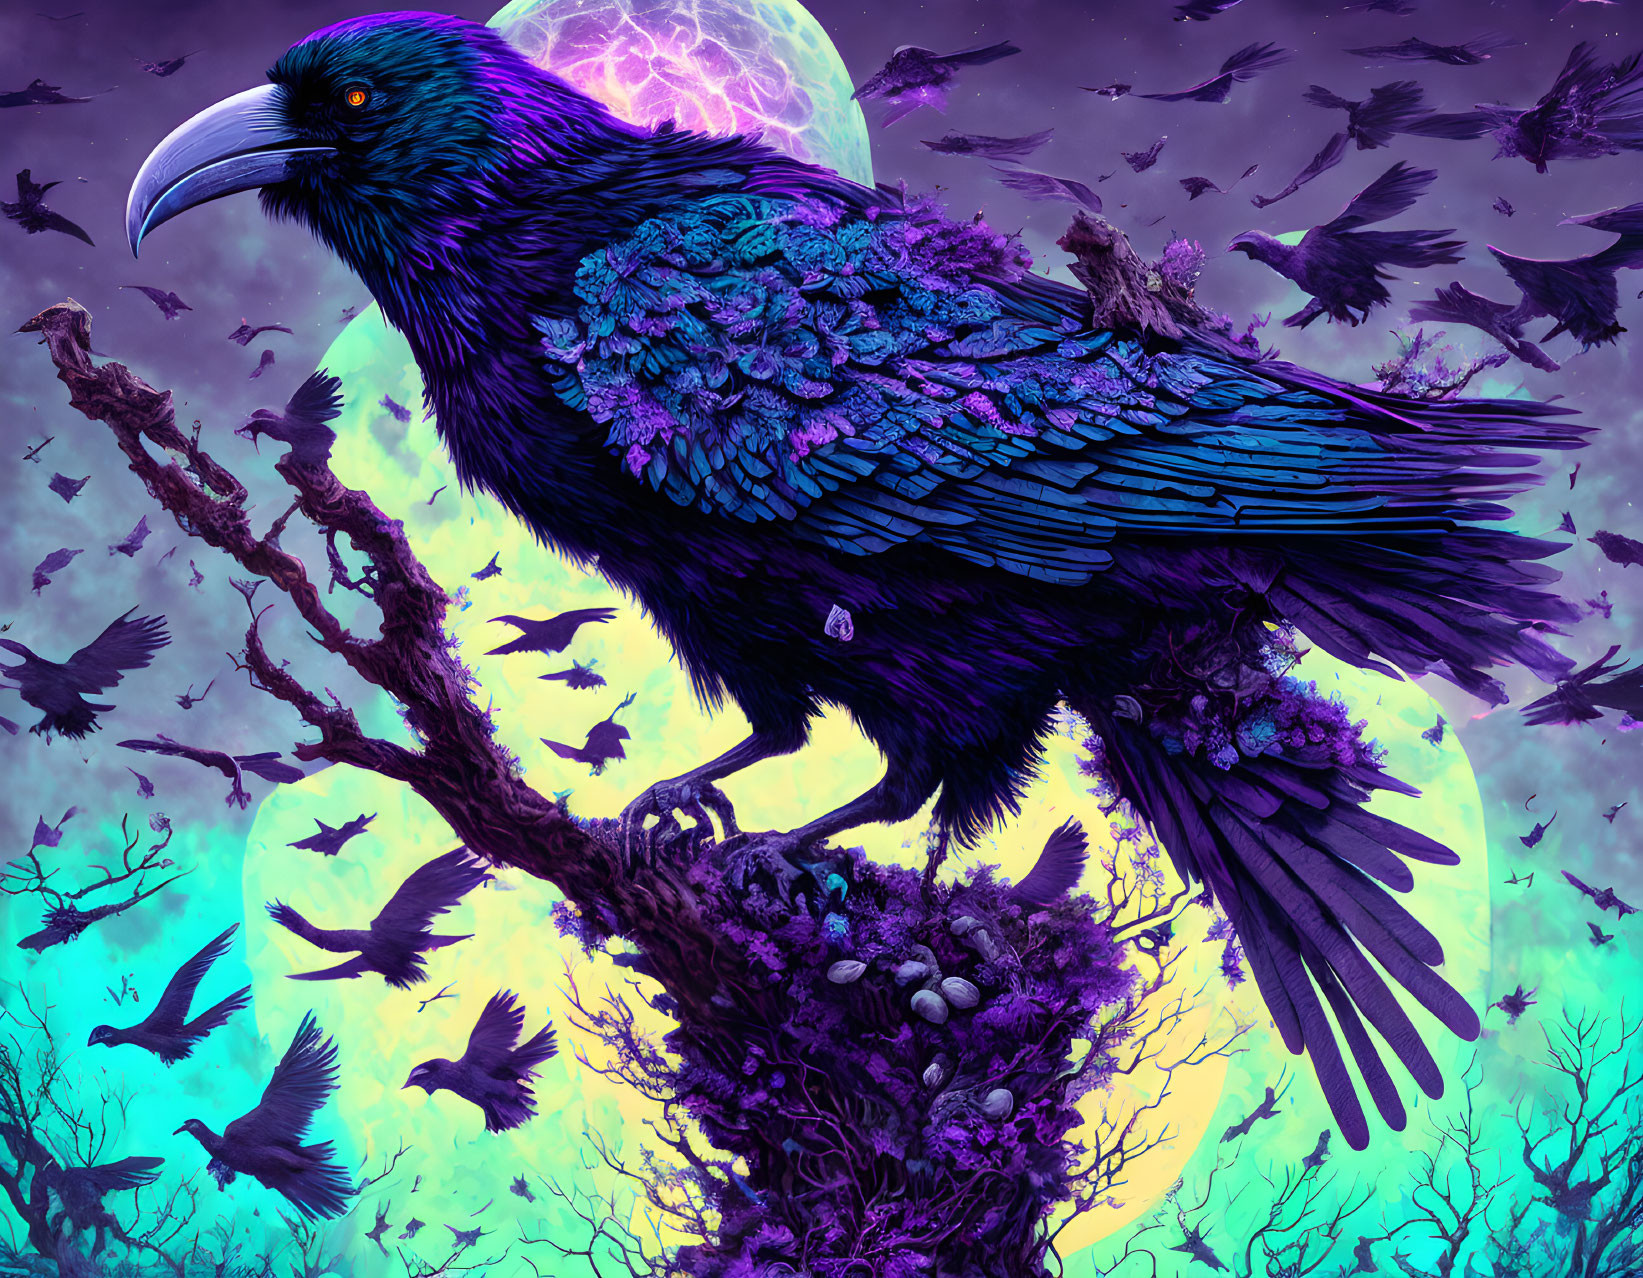 Colorful Raven Artwork with Full Moon and Flying Silhouettes